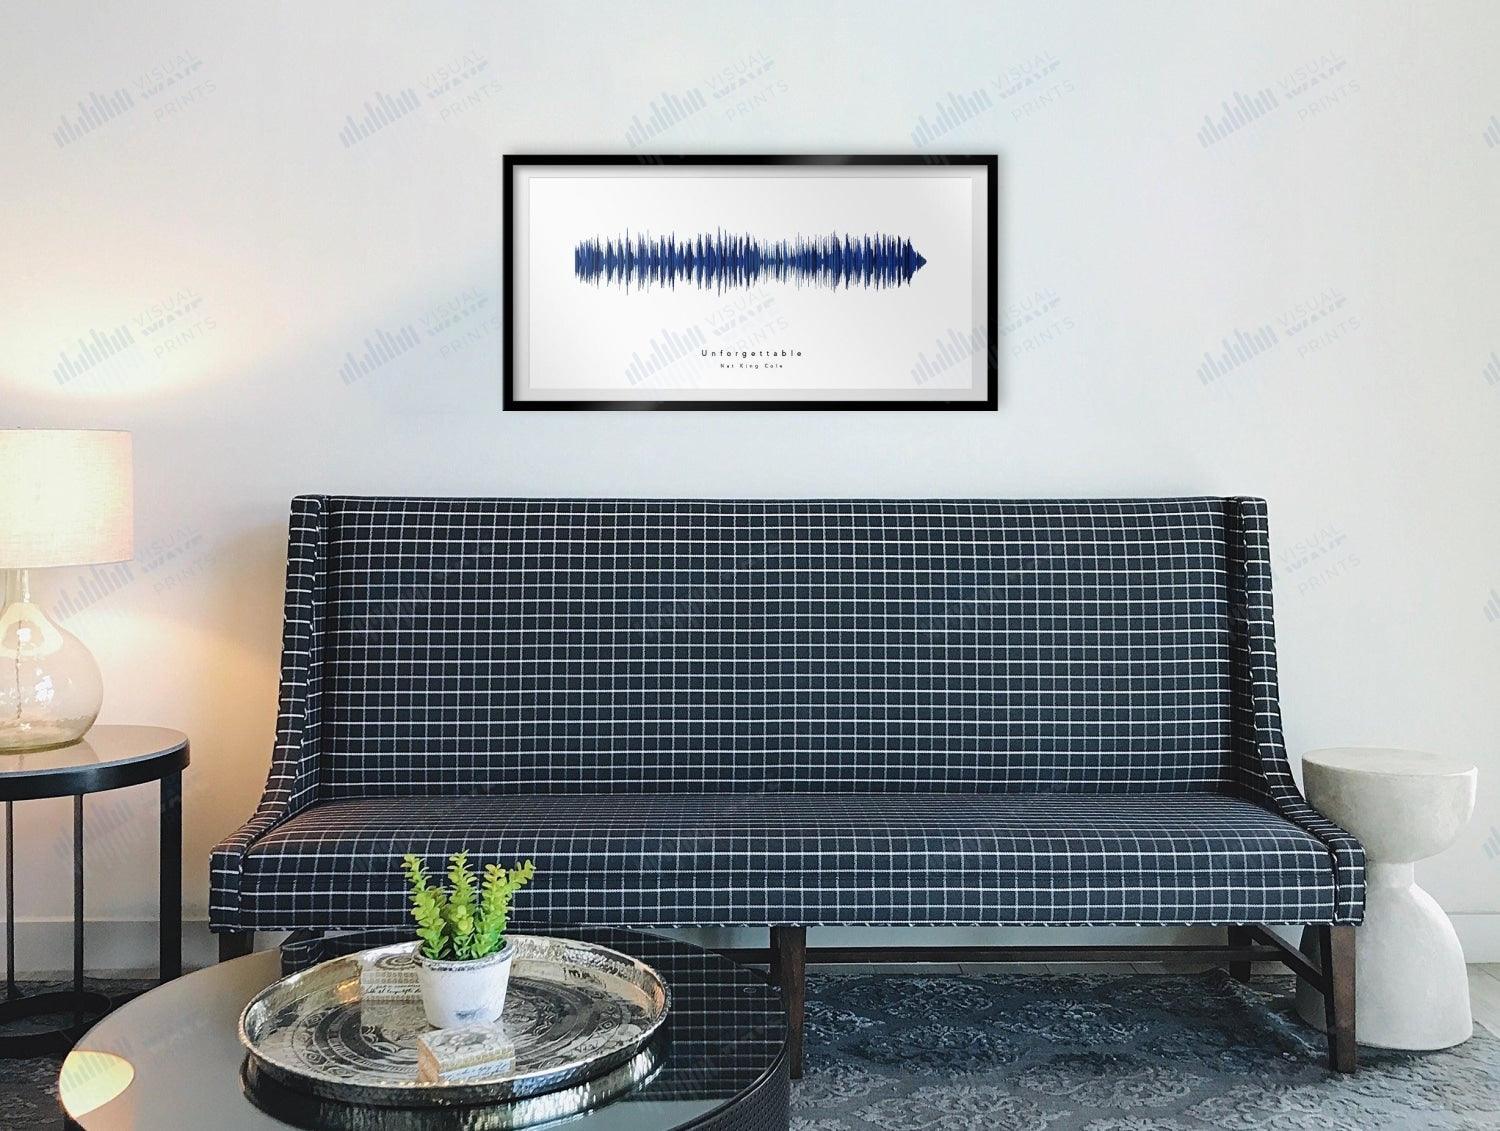 Unforgettable by Nat King Cole - Visual Wave Prints